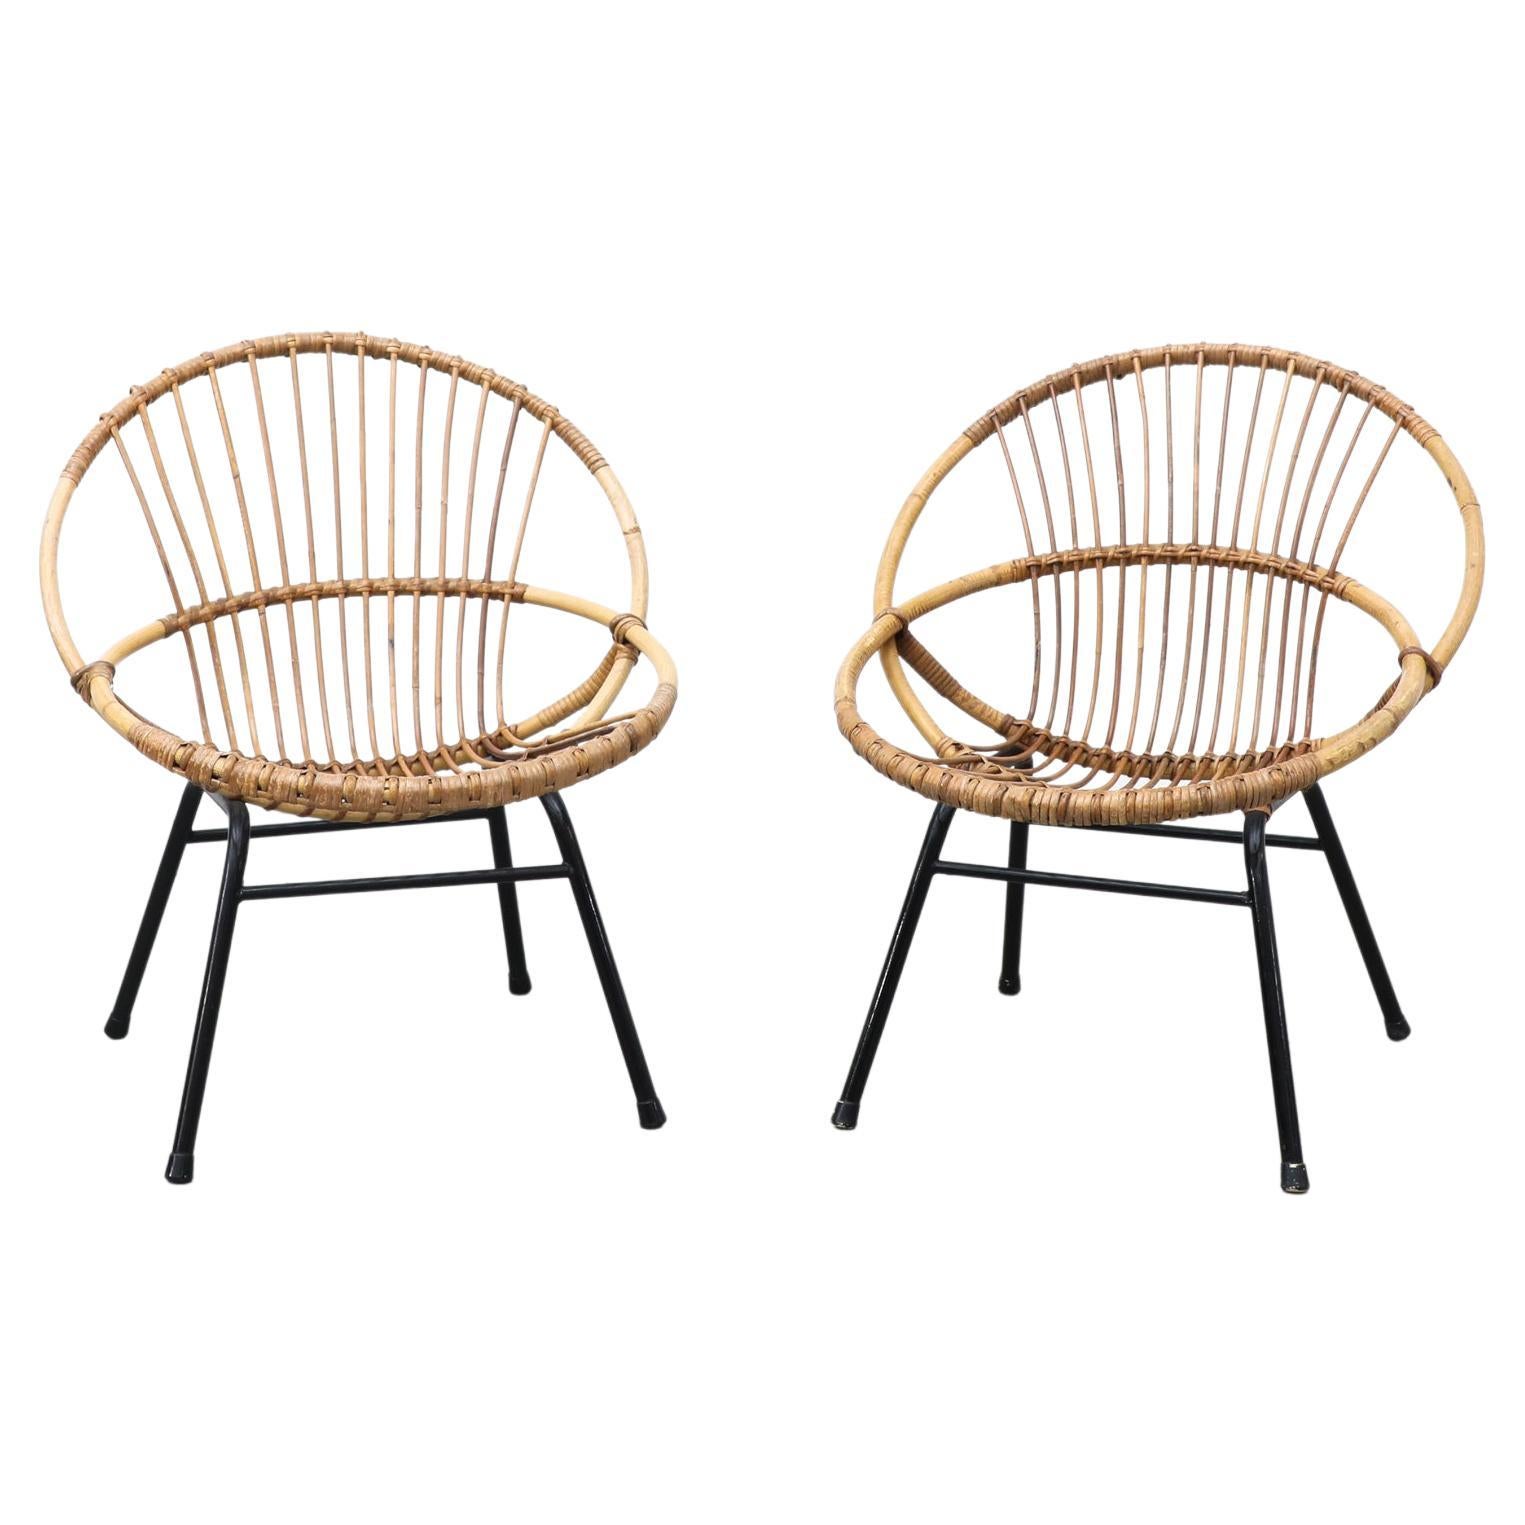 Pair of Rohe Noordwolde Bamboo Hoop Chairs with Black Tubular Legs For Sale